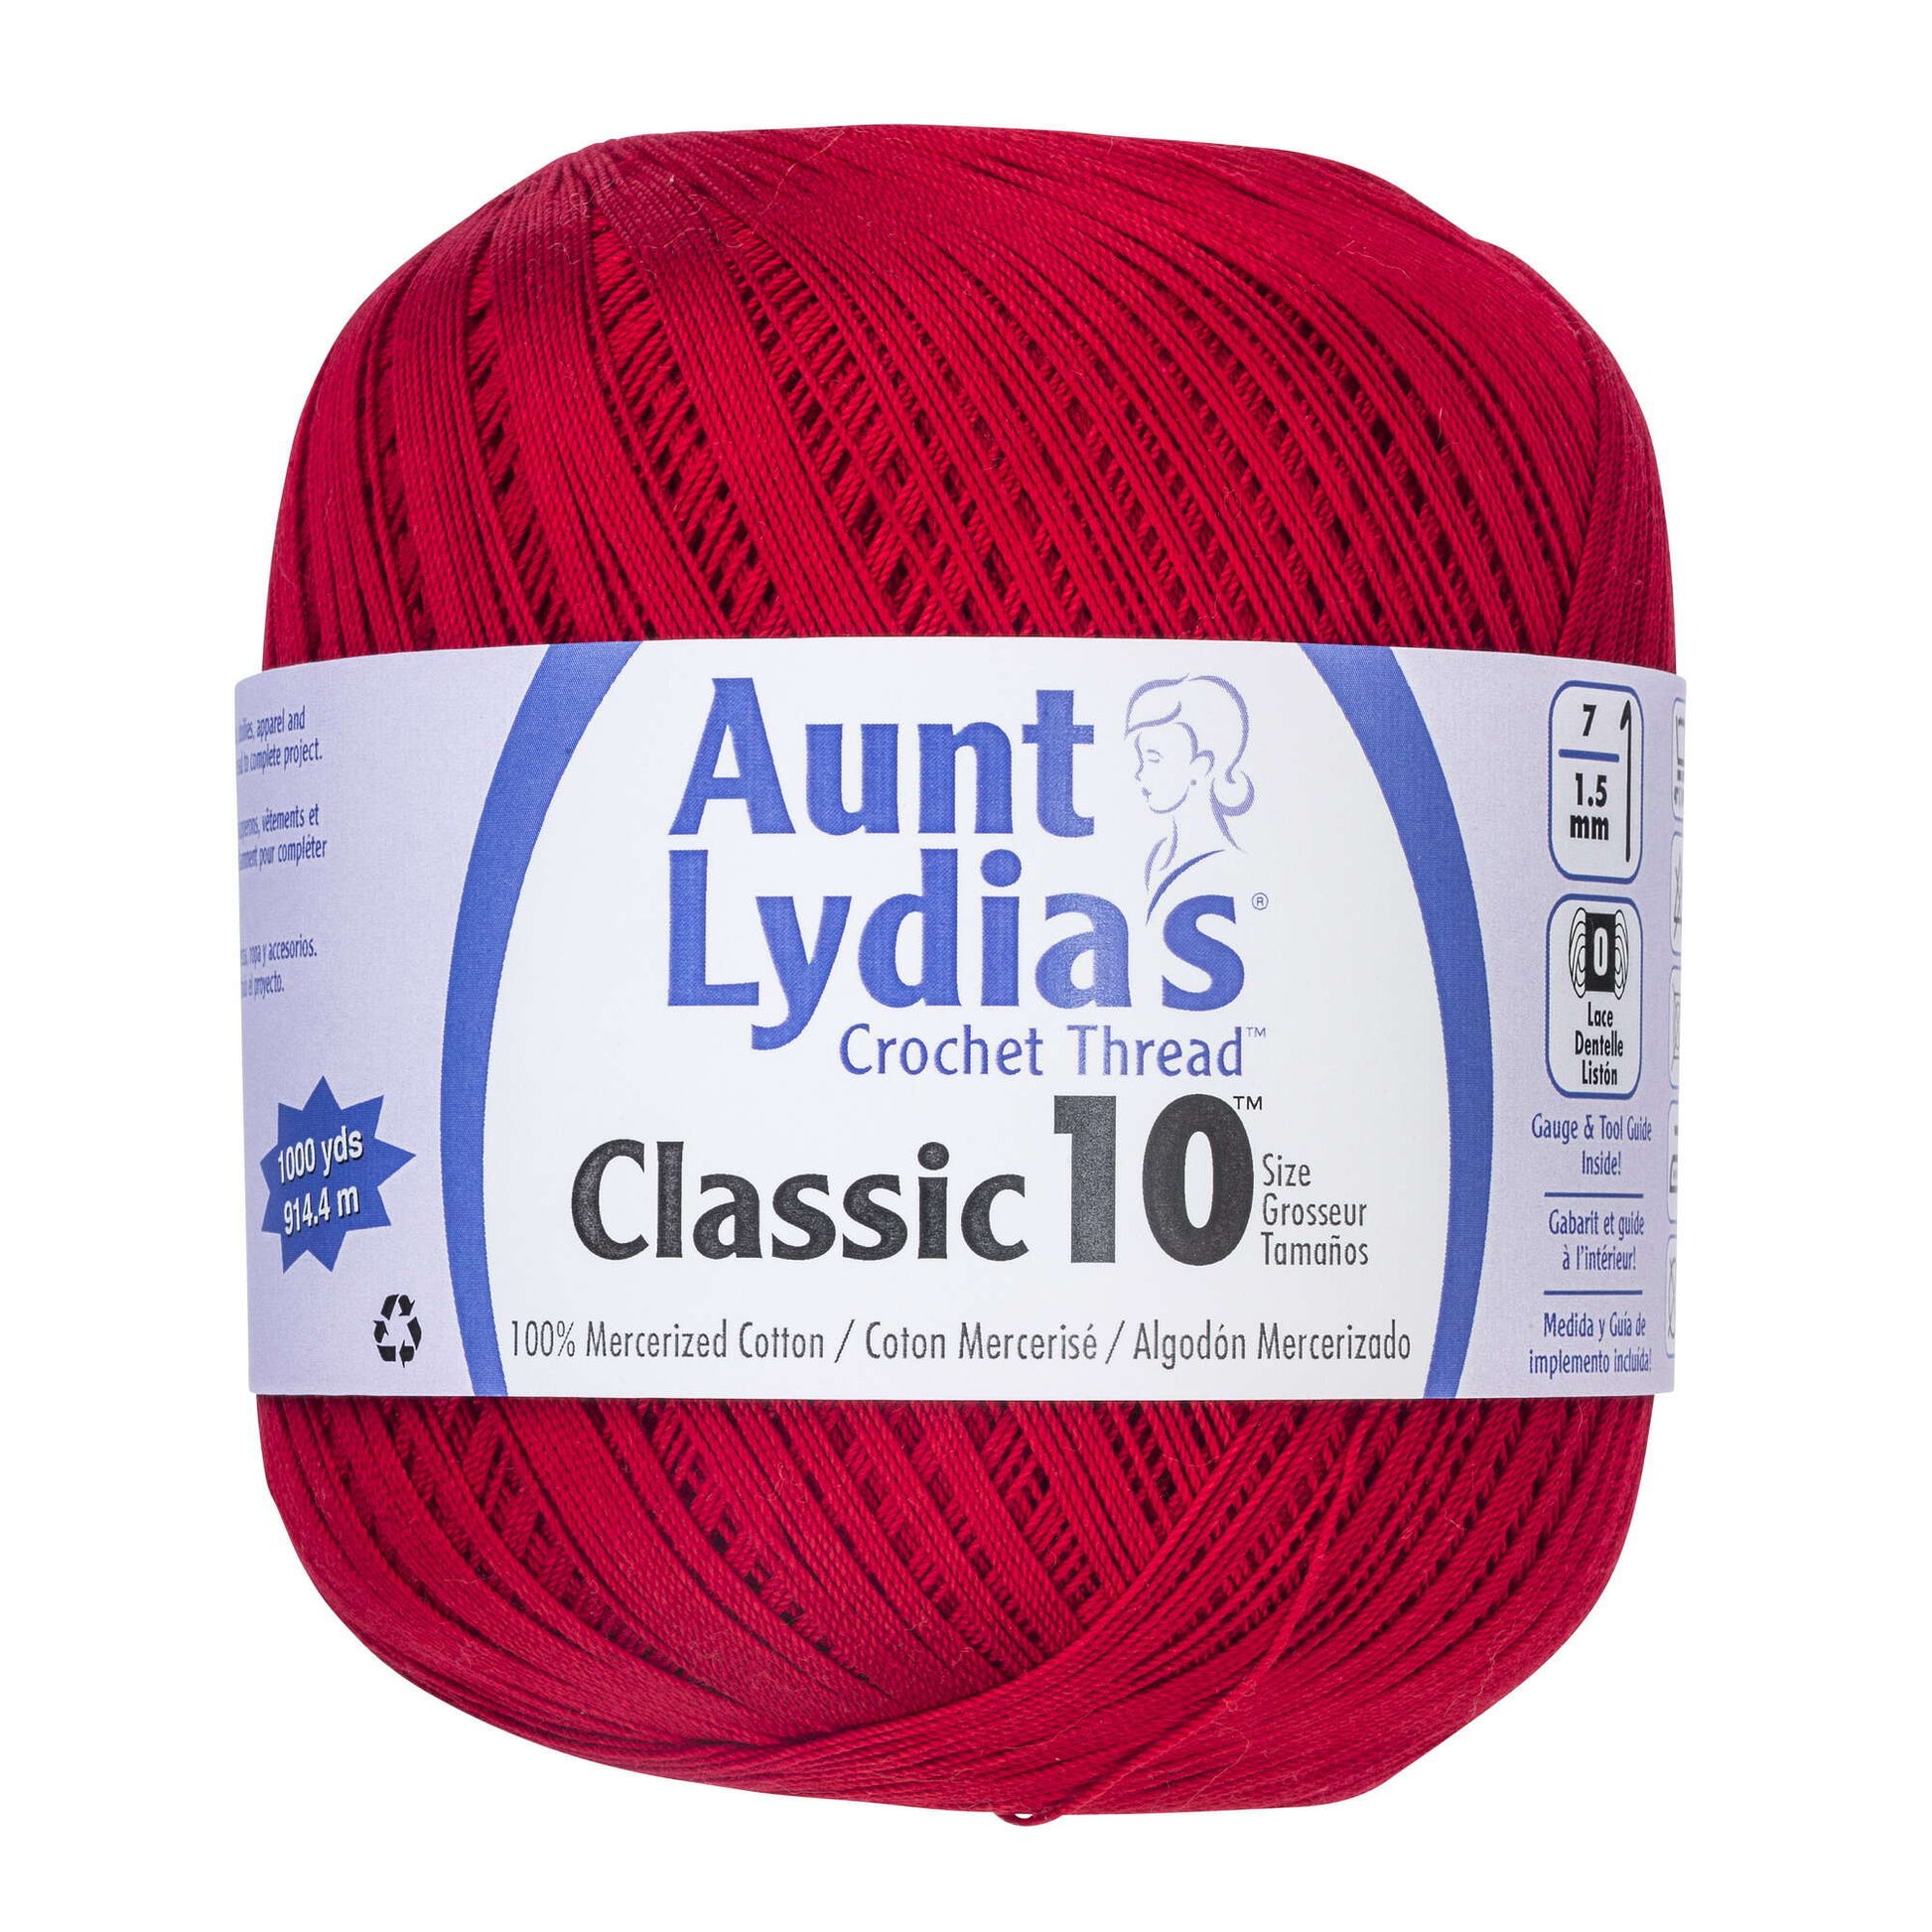 Aunt Lydia's Classic Crochet Thread (Large) Size 10 Victory Red